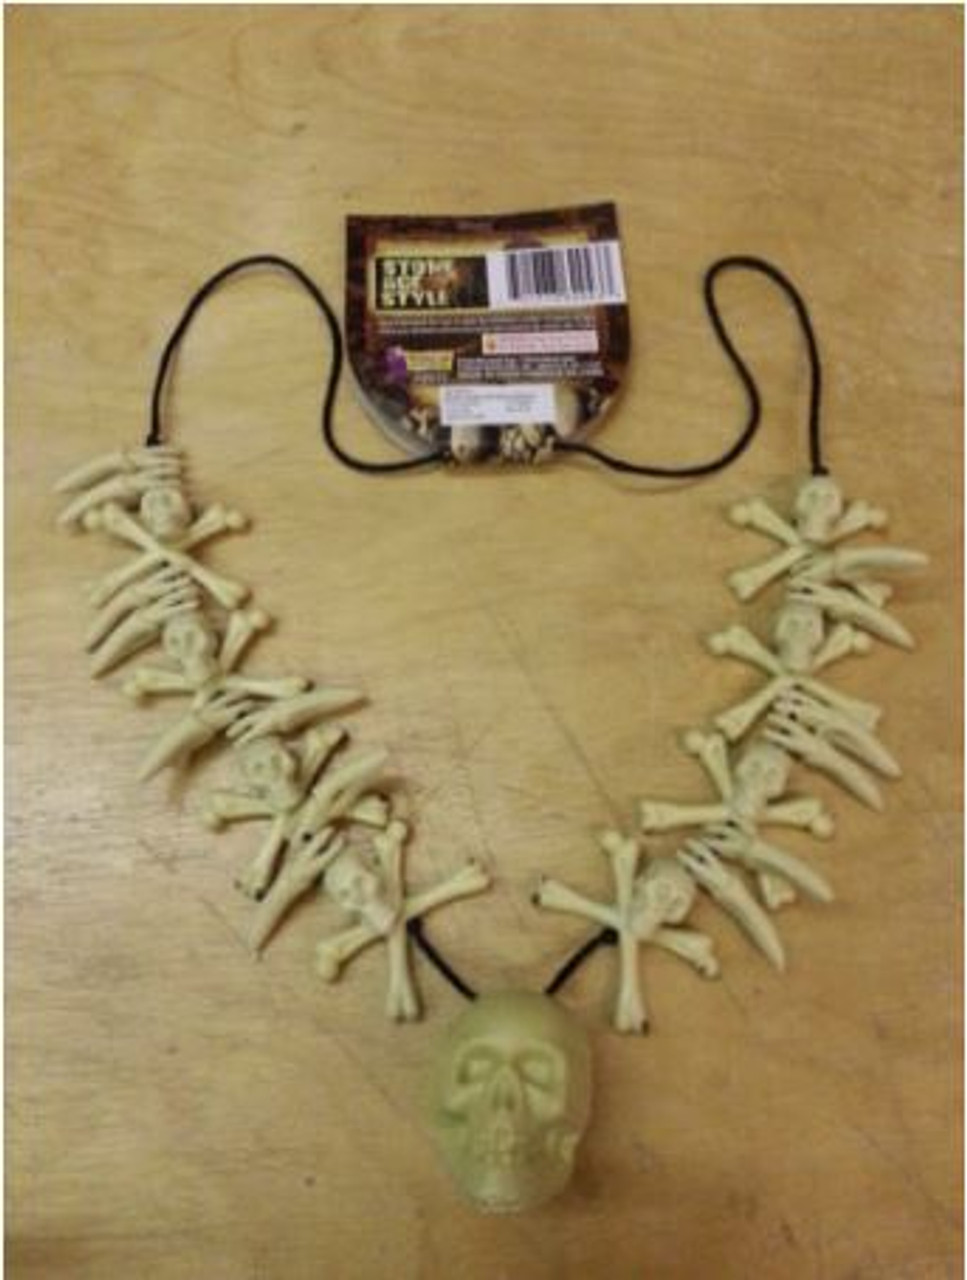 Stone Age Caveman Cavewoman Sabre Tooth Witch Doctor Halloween Costume  Necklace | eBay